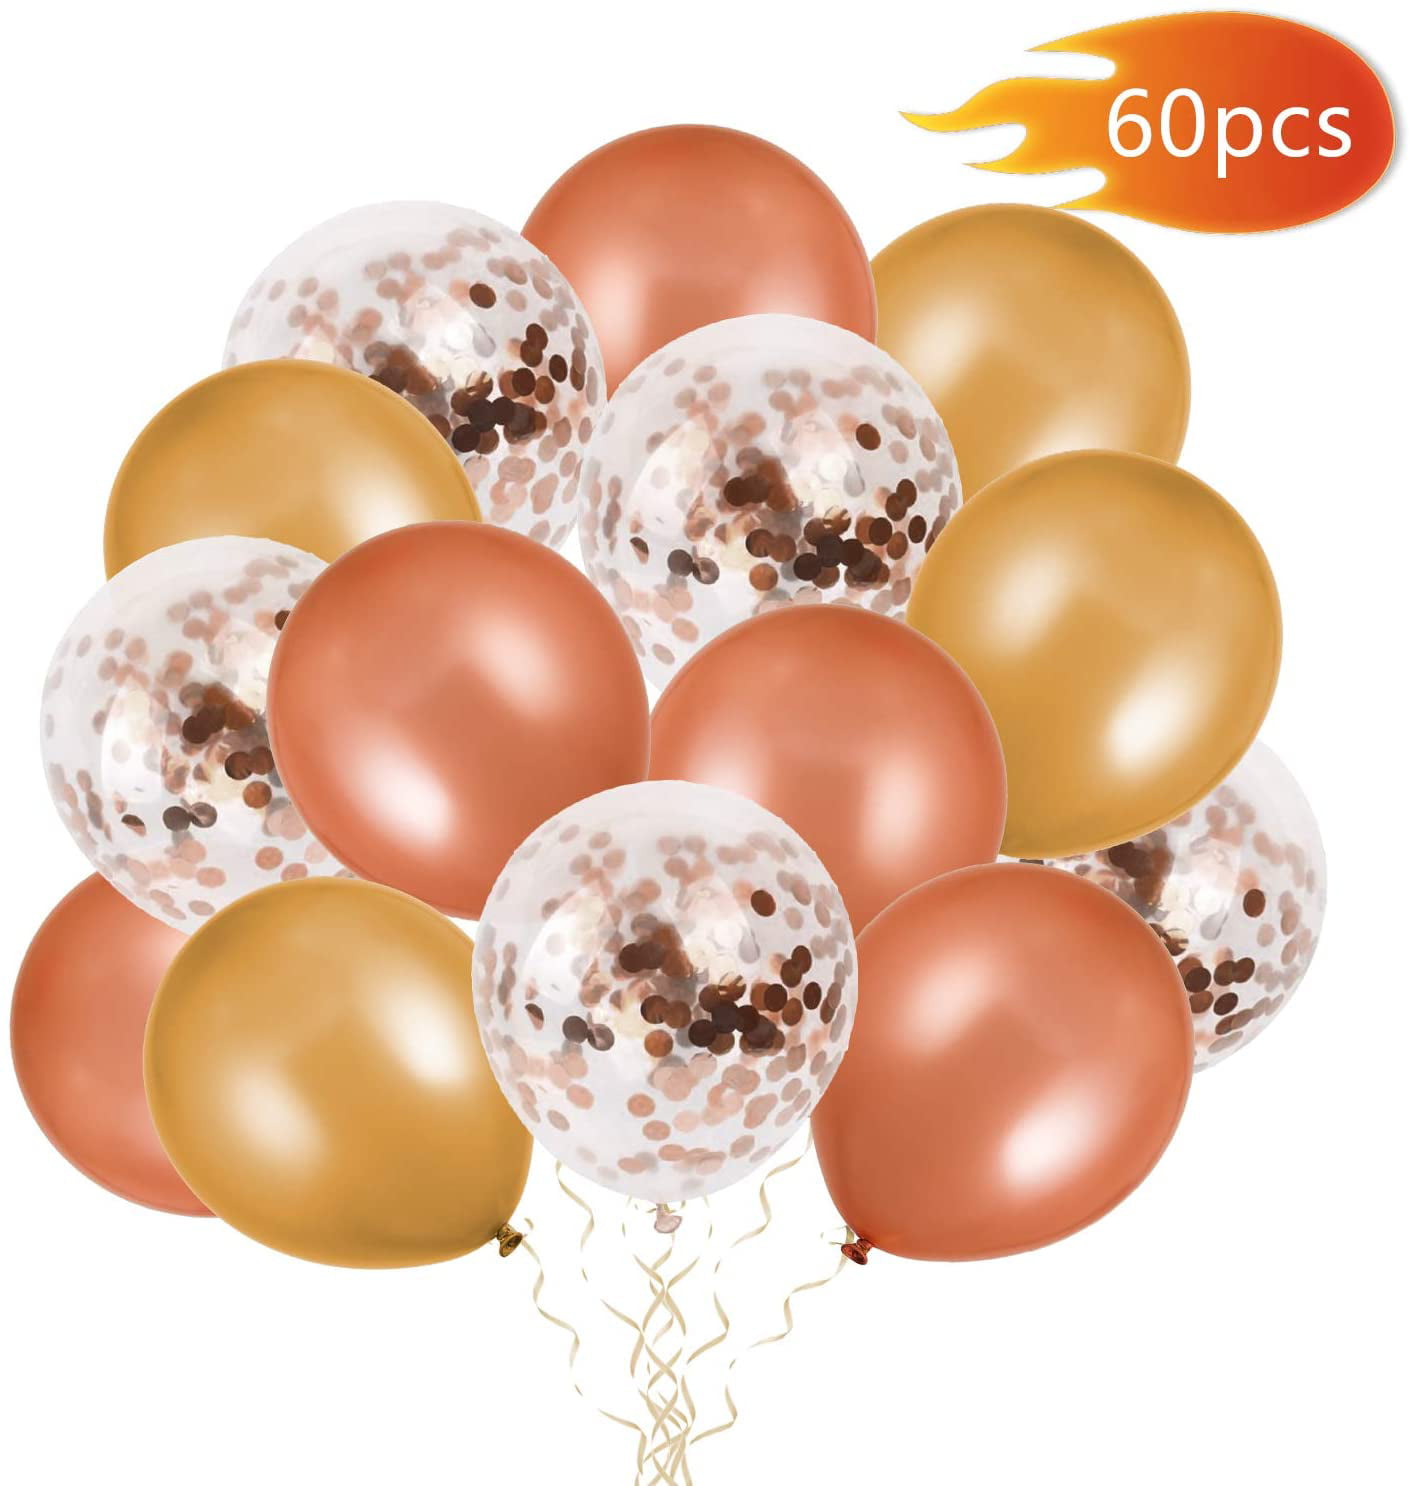 20x Clear Latex Balloons with Gold Confetti Wedding Birthday Party Decor 